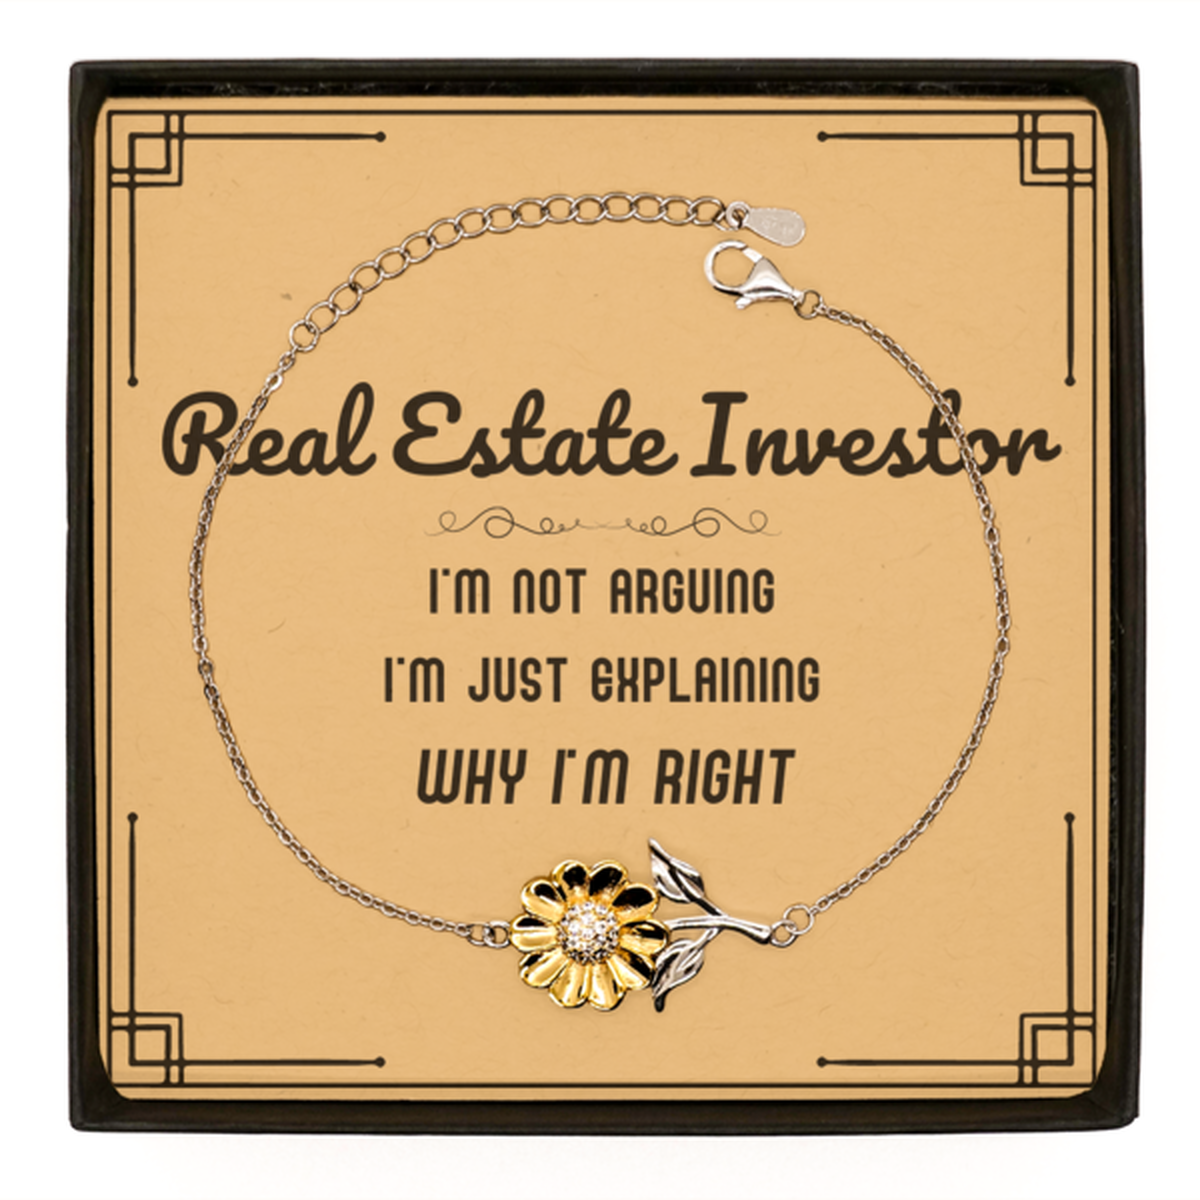 Real Estate Investor I'm not Arguing. I'm Just Explaining Why I'm RIGHT Sunflower Bracelet, Funny Saying Quote Real Estate Investor Gifts For Real Estate Investor Message Card Graduation Birthday Christmas Gifts for Men Women Coworker